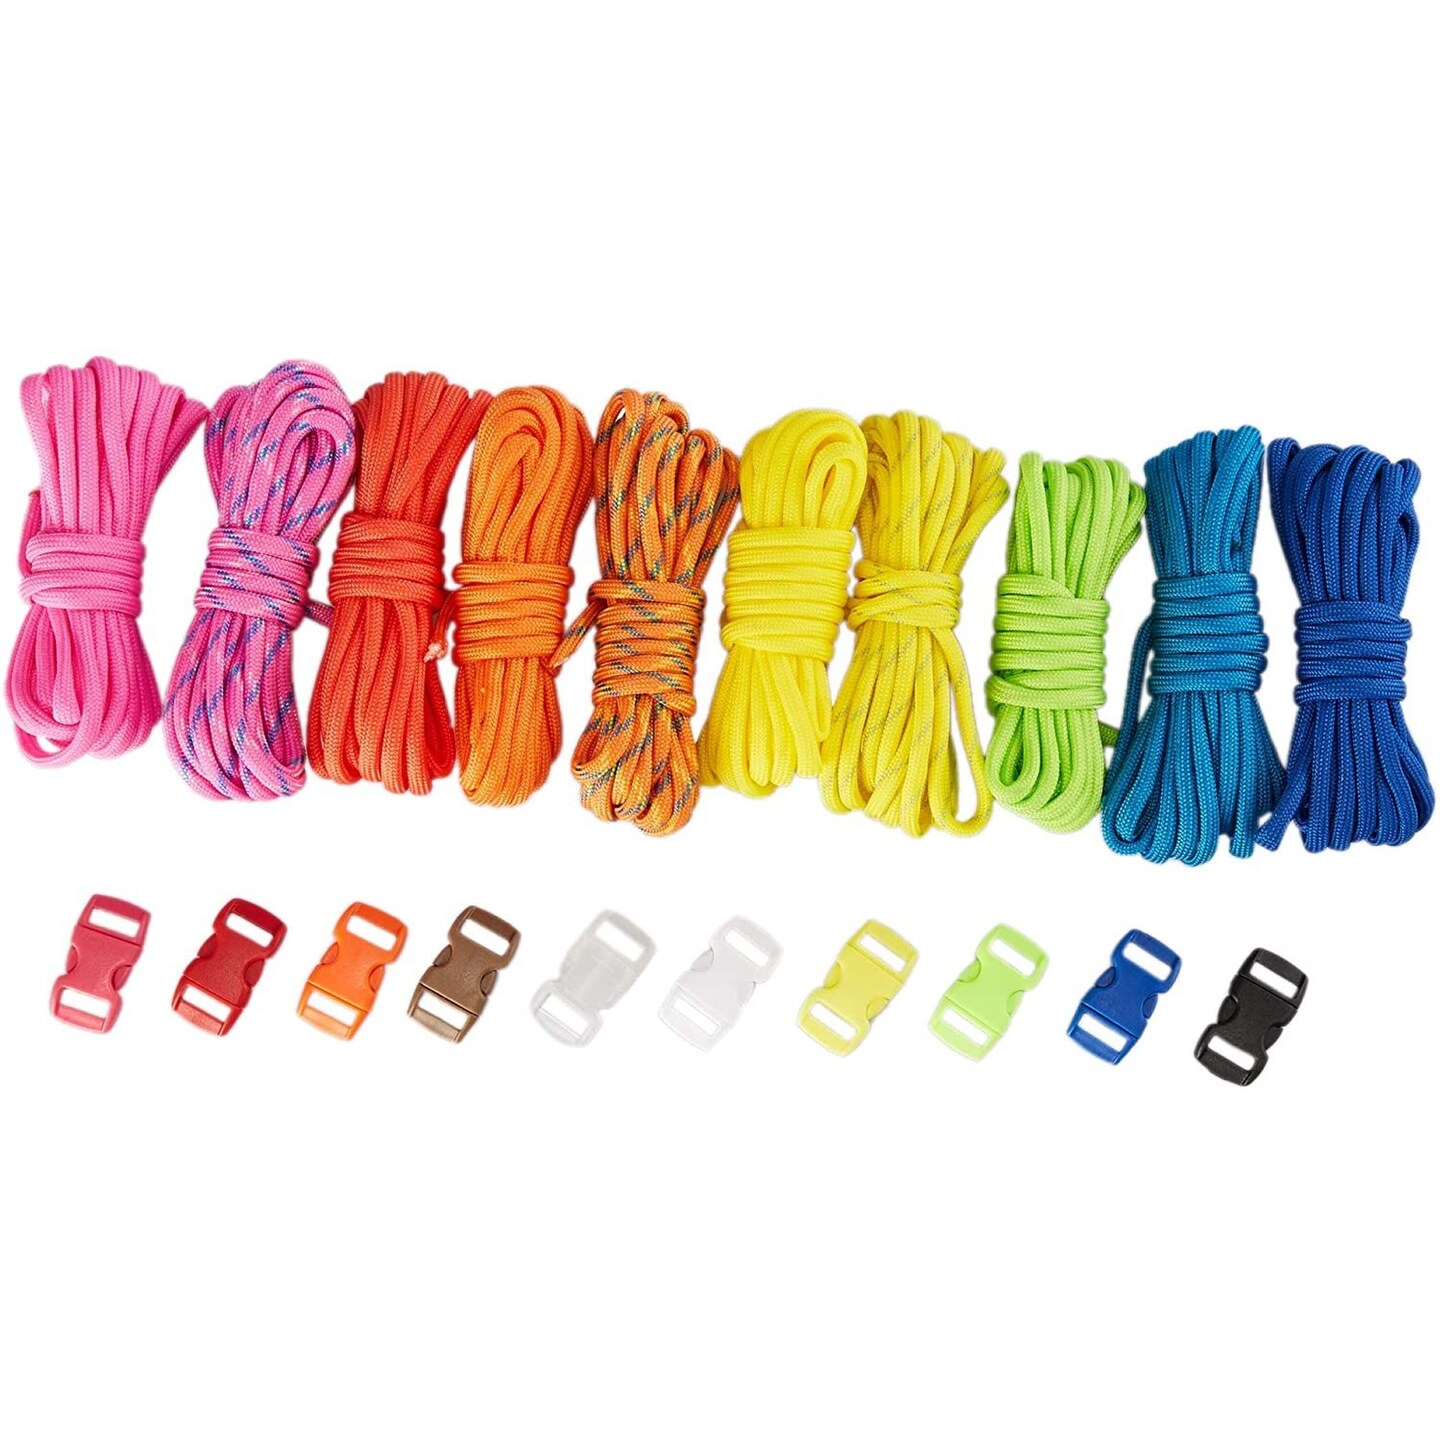 Paracord Rope with Buckles for Crafts (10 Colors, 20 Pieces